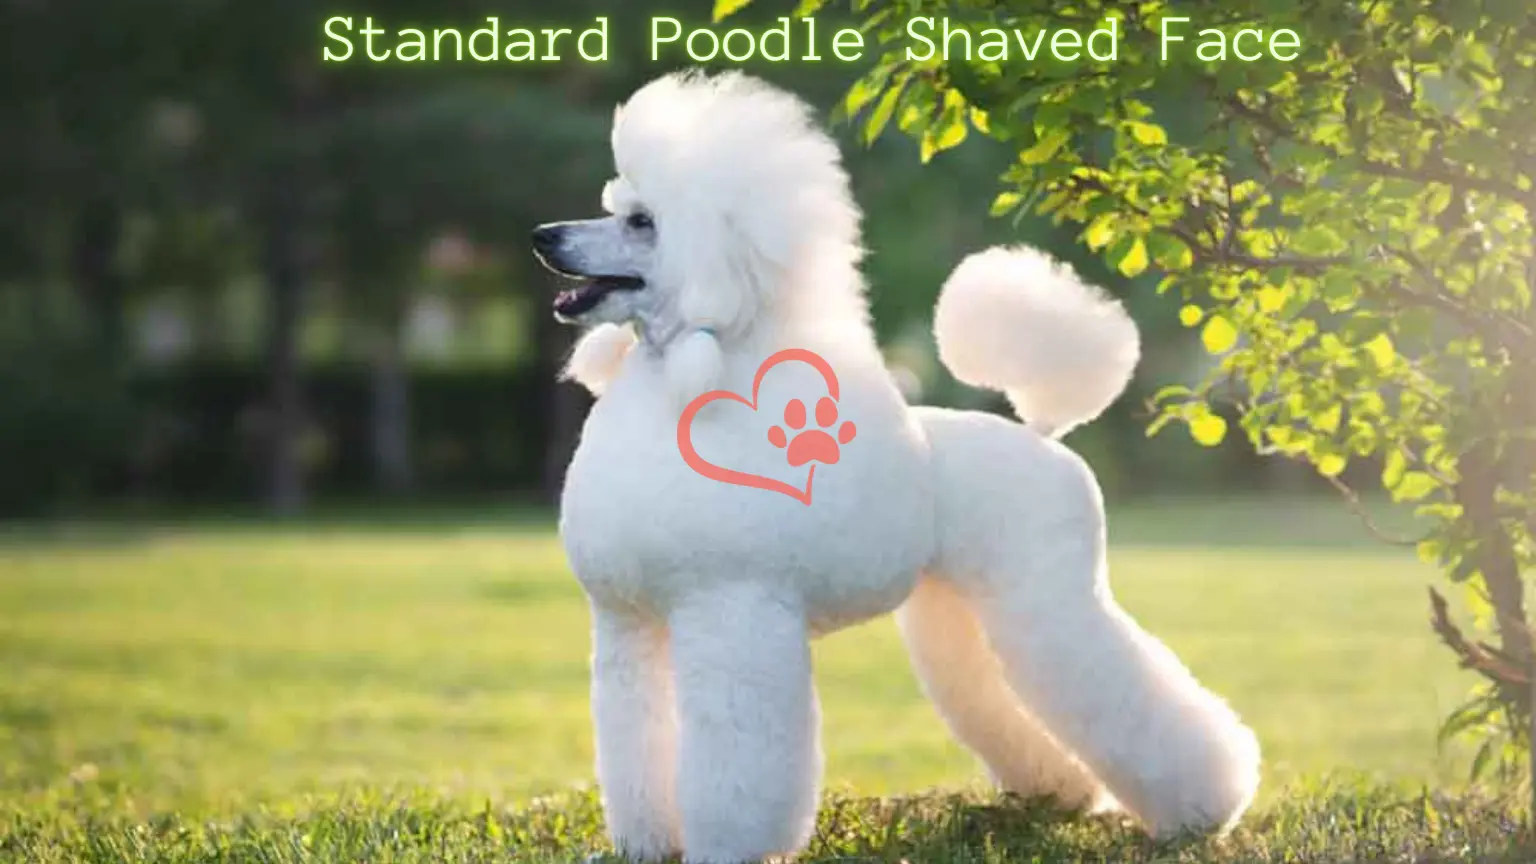 how to keep a standard poodle shaved face